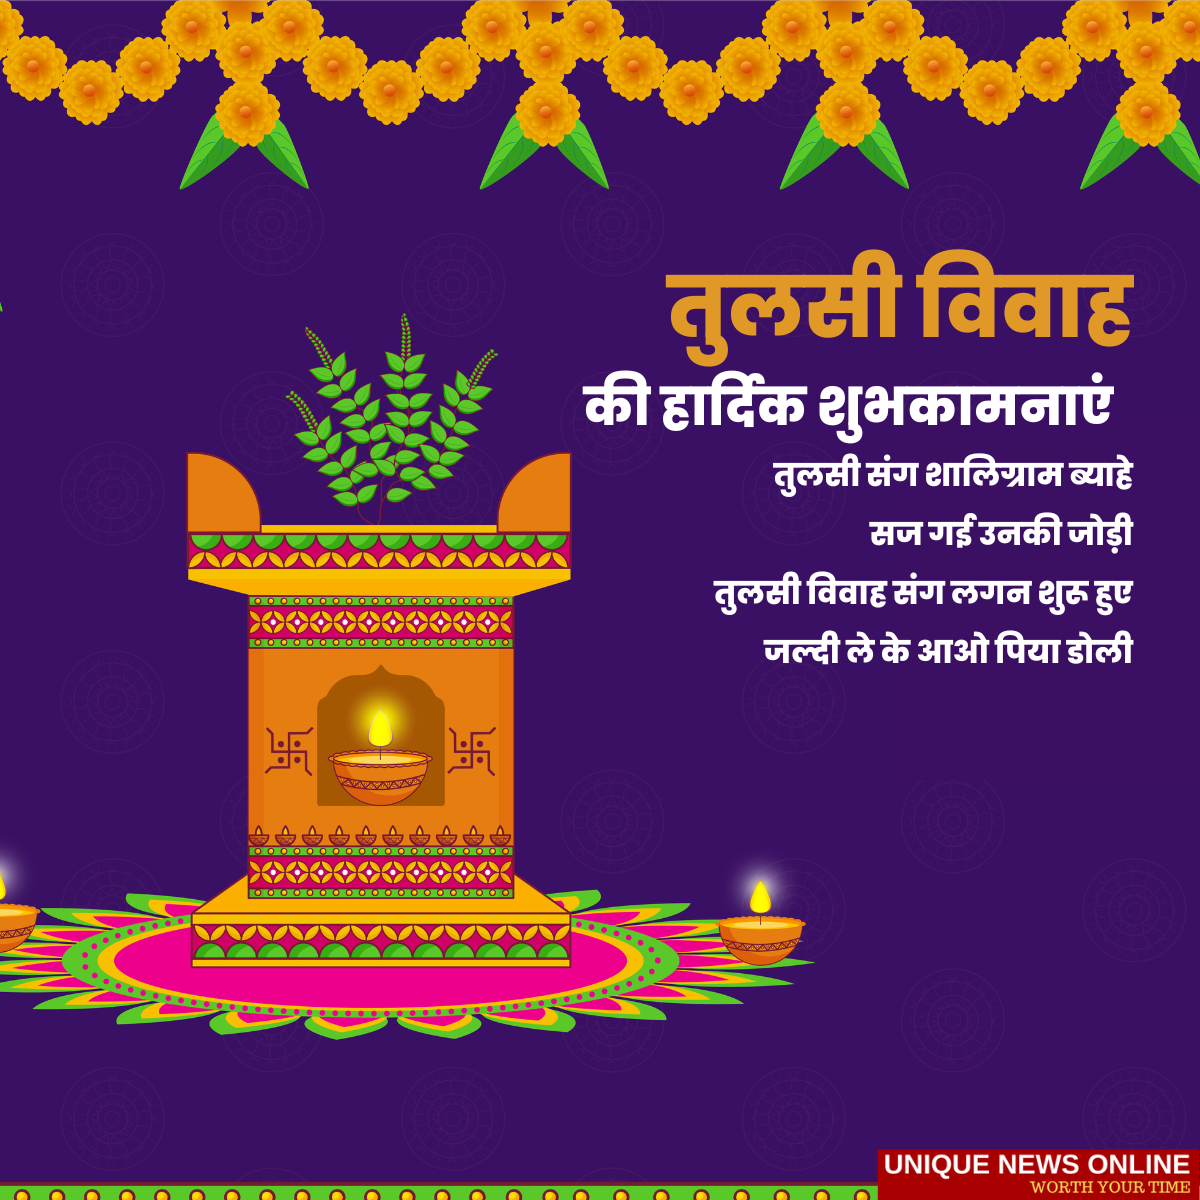 Tulsi Vivah Wishes In Hindi 2022: Greetings, Quotes, Shayari, HD Images, Messages, and Posters